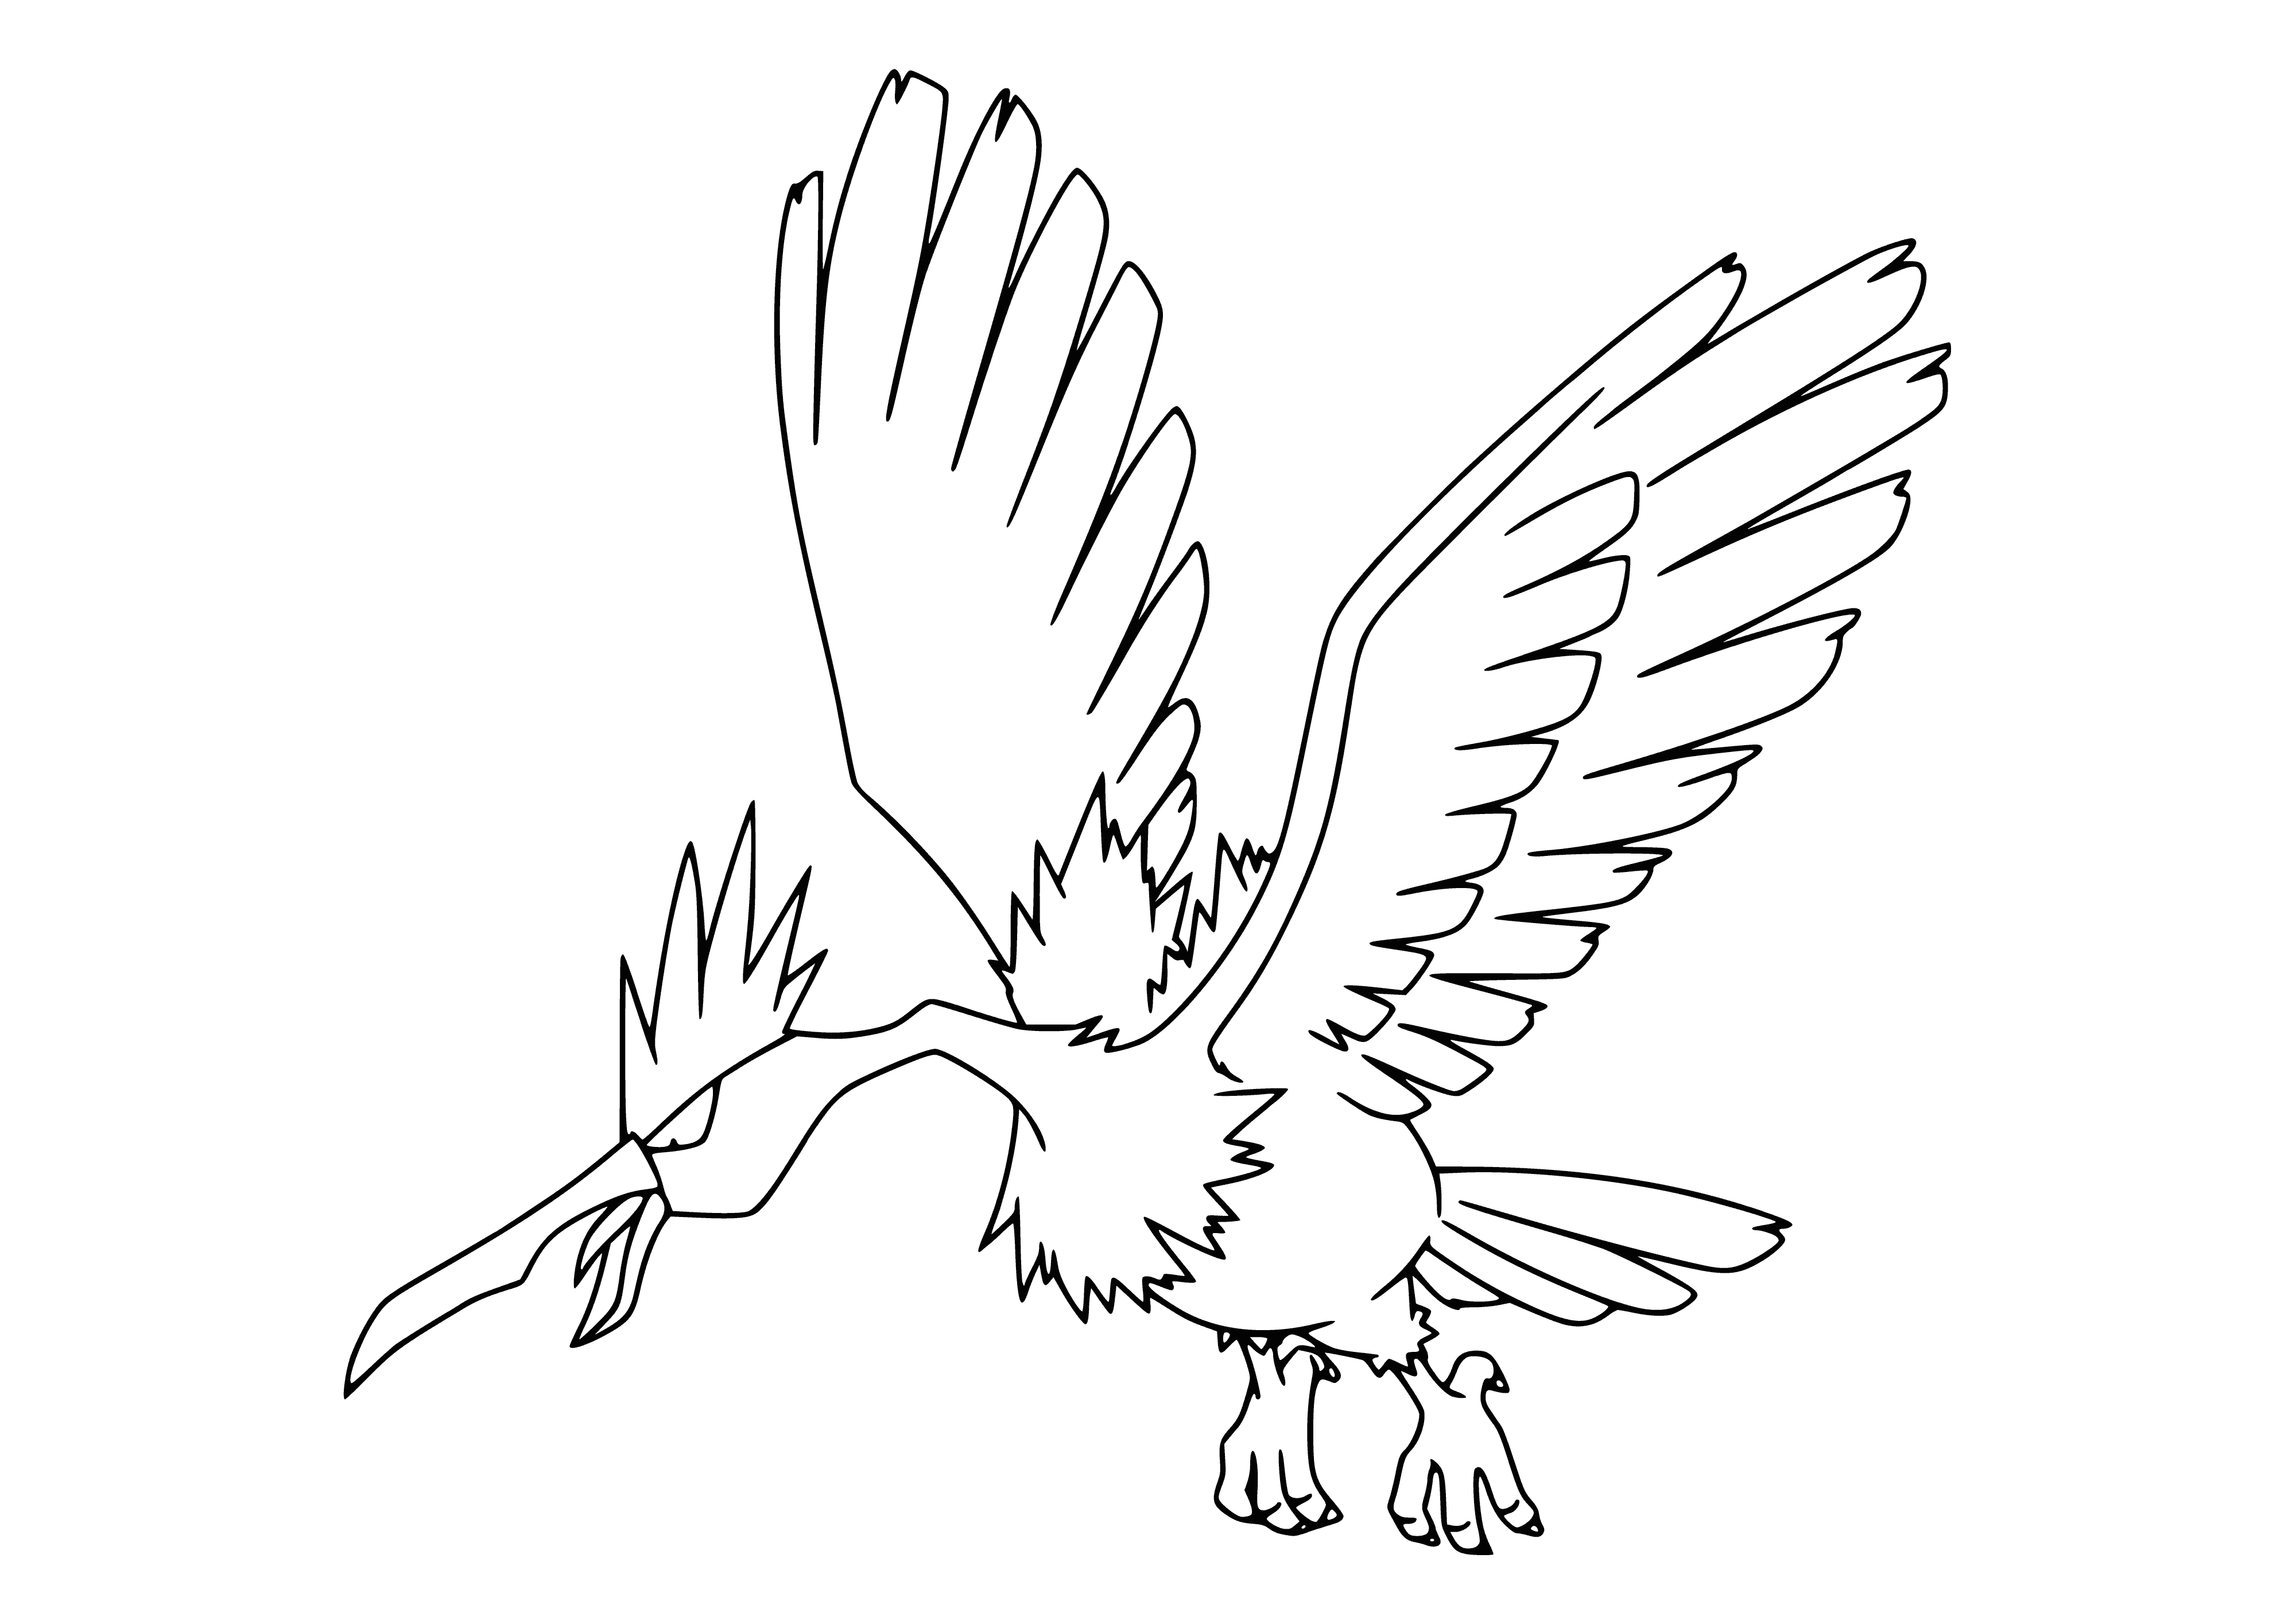 coloring page: A blue, spiky Firow Pokemon with white wings, a long tail and two horns on its head. It has two small eyes and a small mouth.